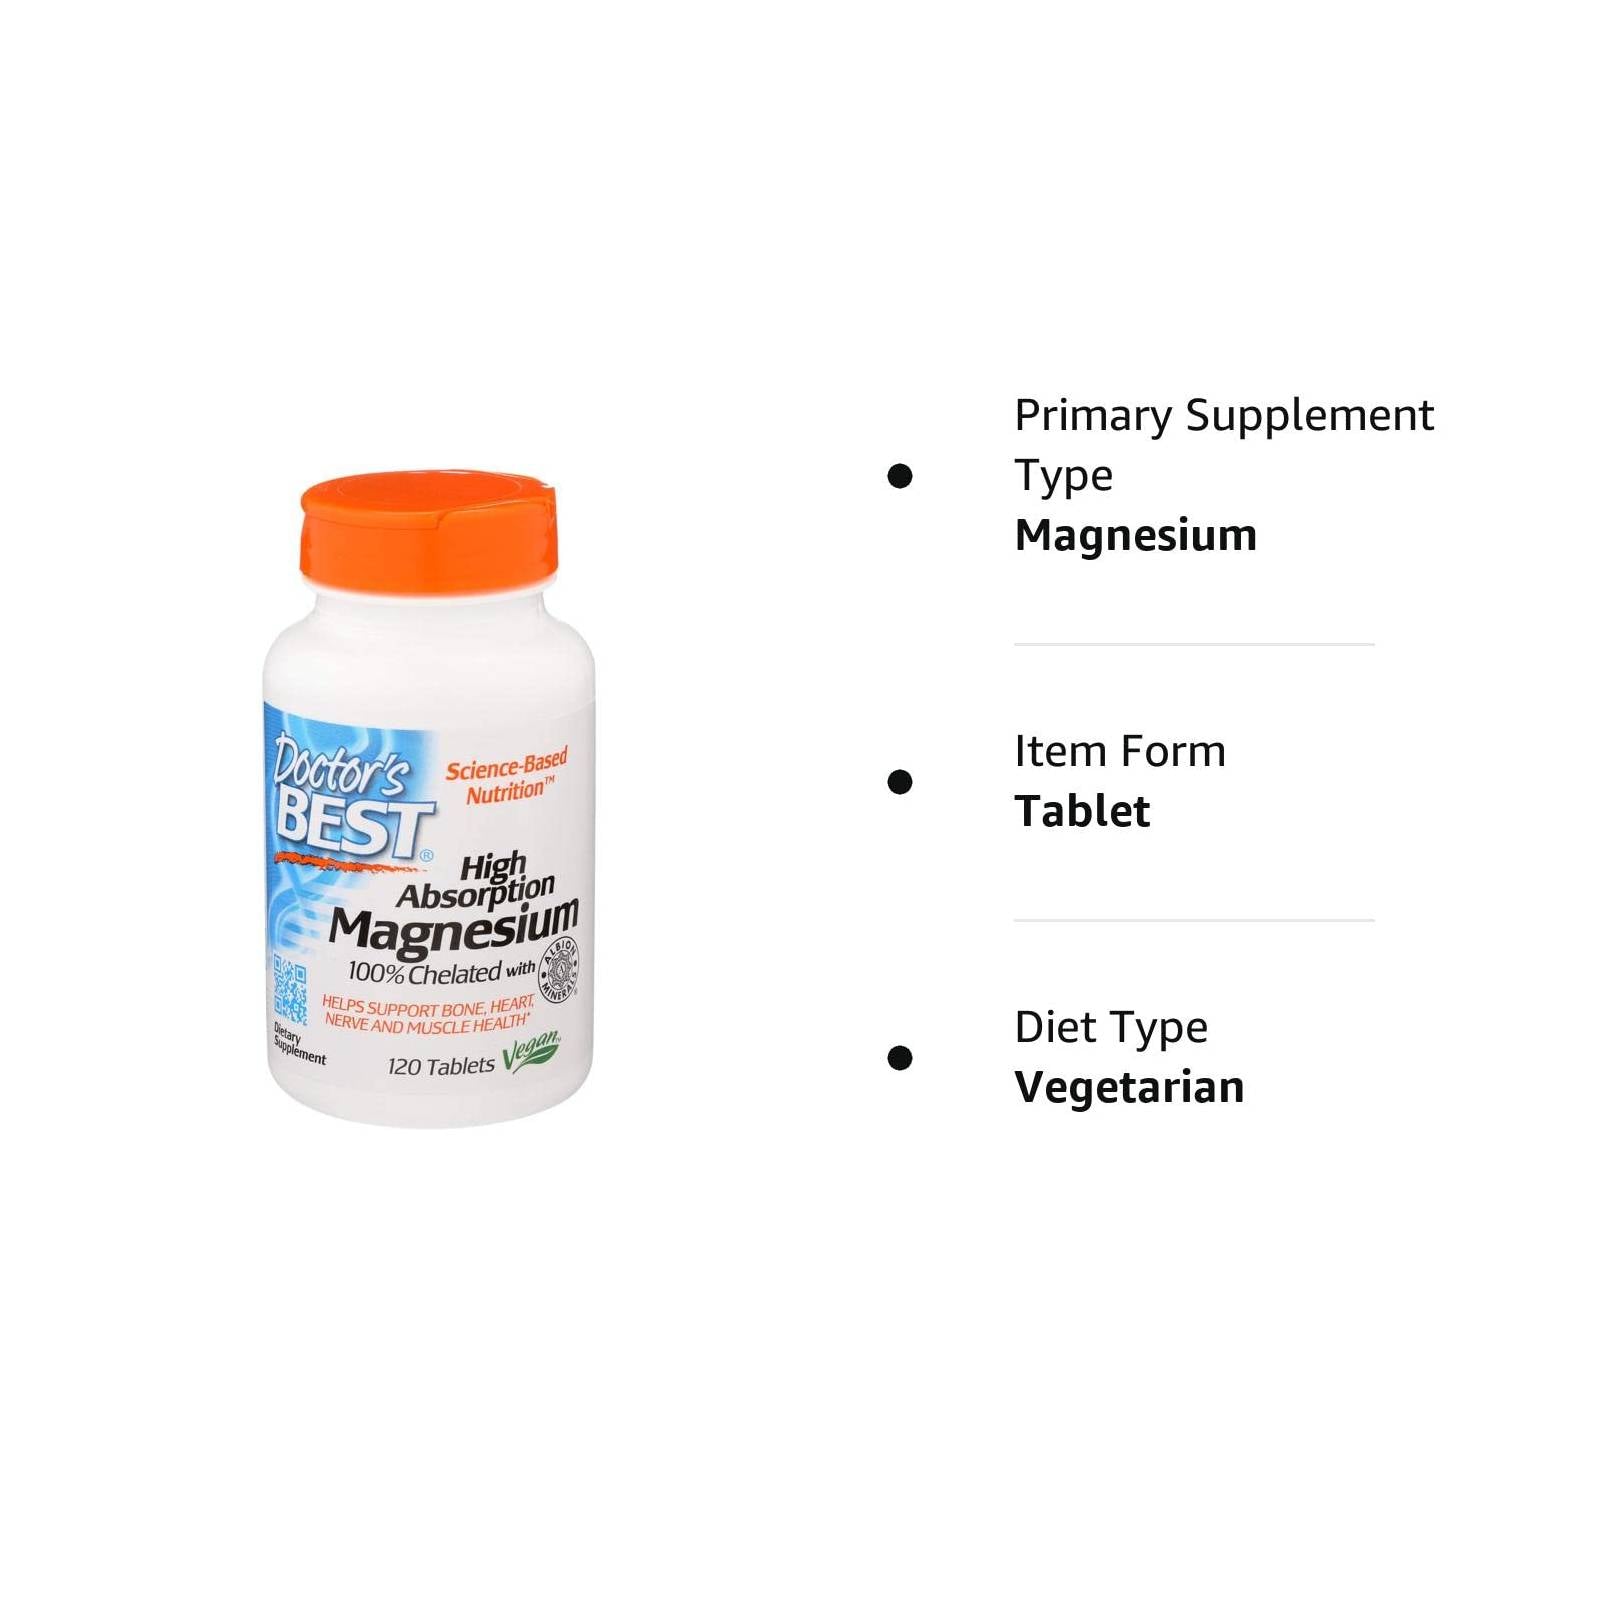 Doctor's Best High Absorption Magnesium, 100 Mg 120 Tablets